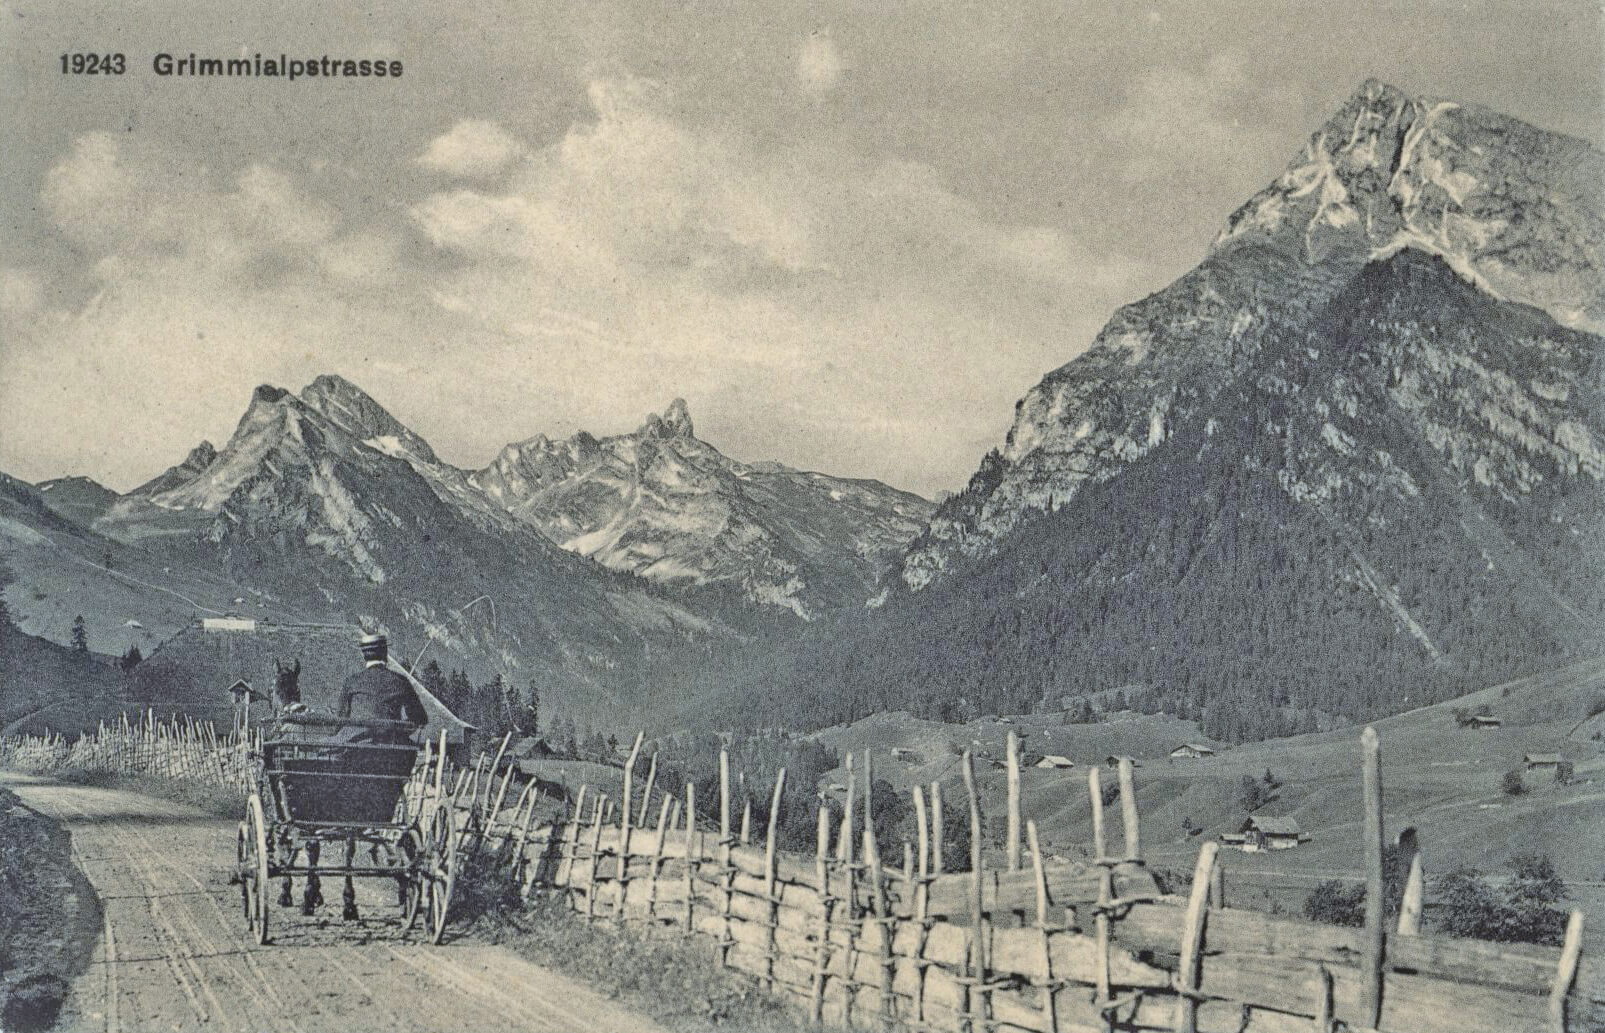 With horse and carriage on the old Grimmialp road